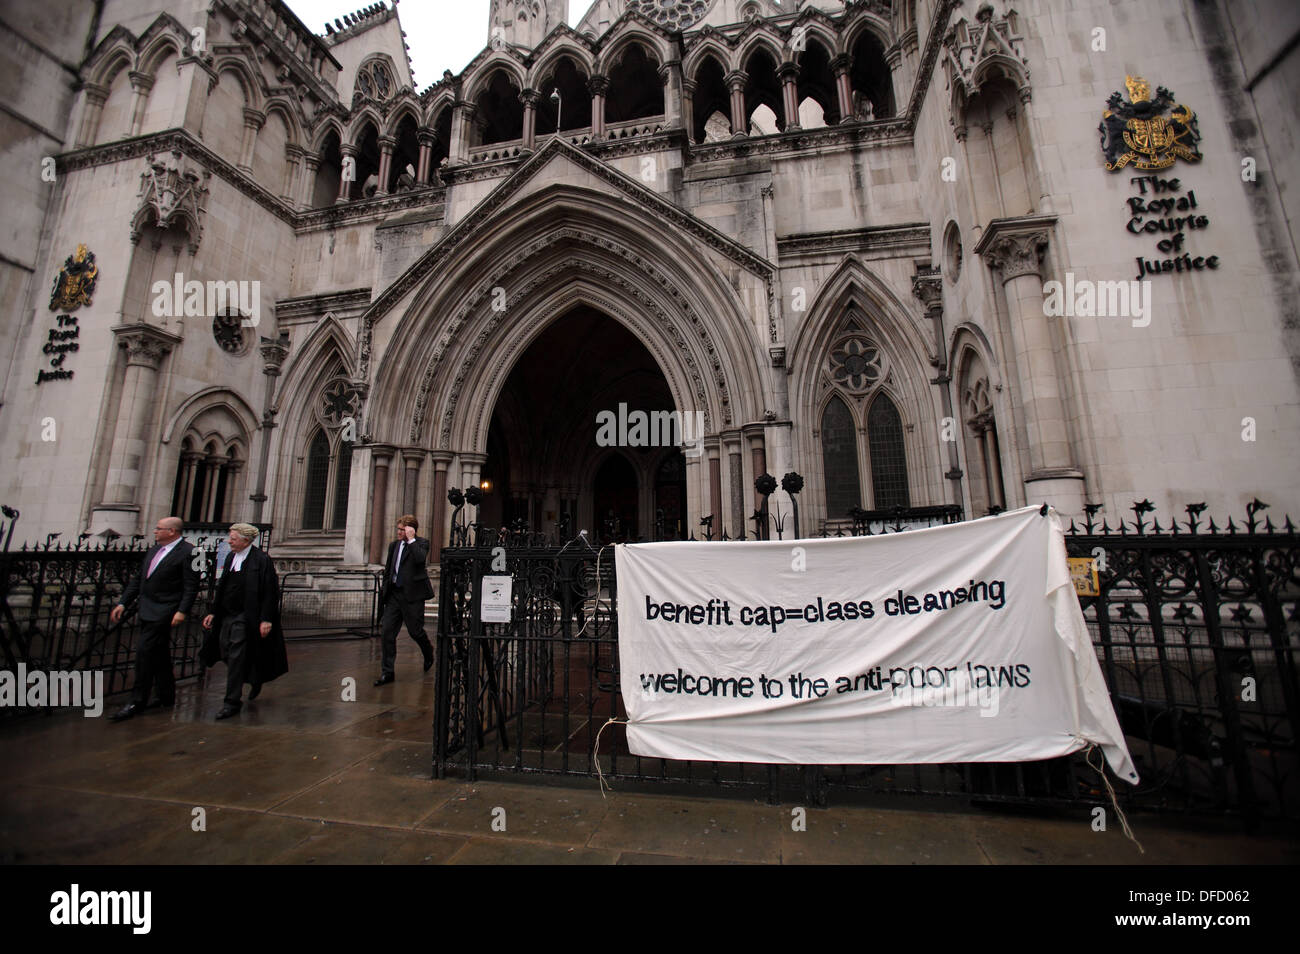 Protestors against the cuts and Bedroom Tax outside the High Court for a legal challenge to the Conservative Government's cutbacks England, UK Stock Photo